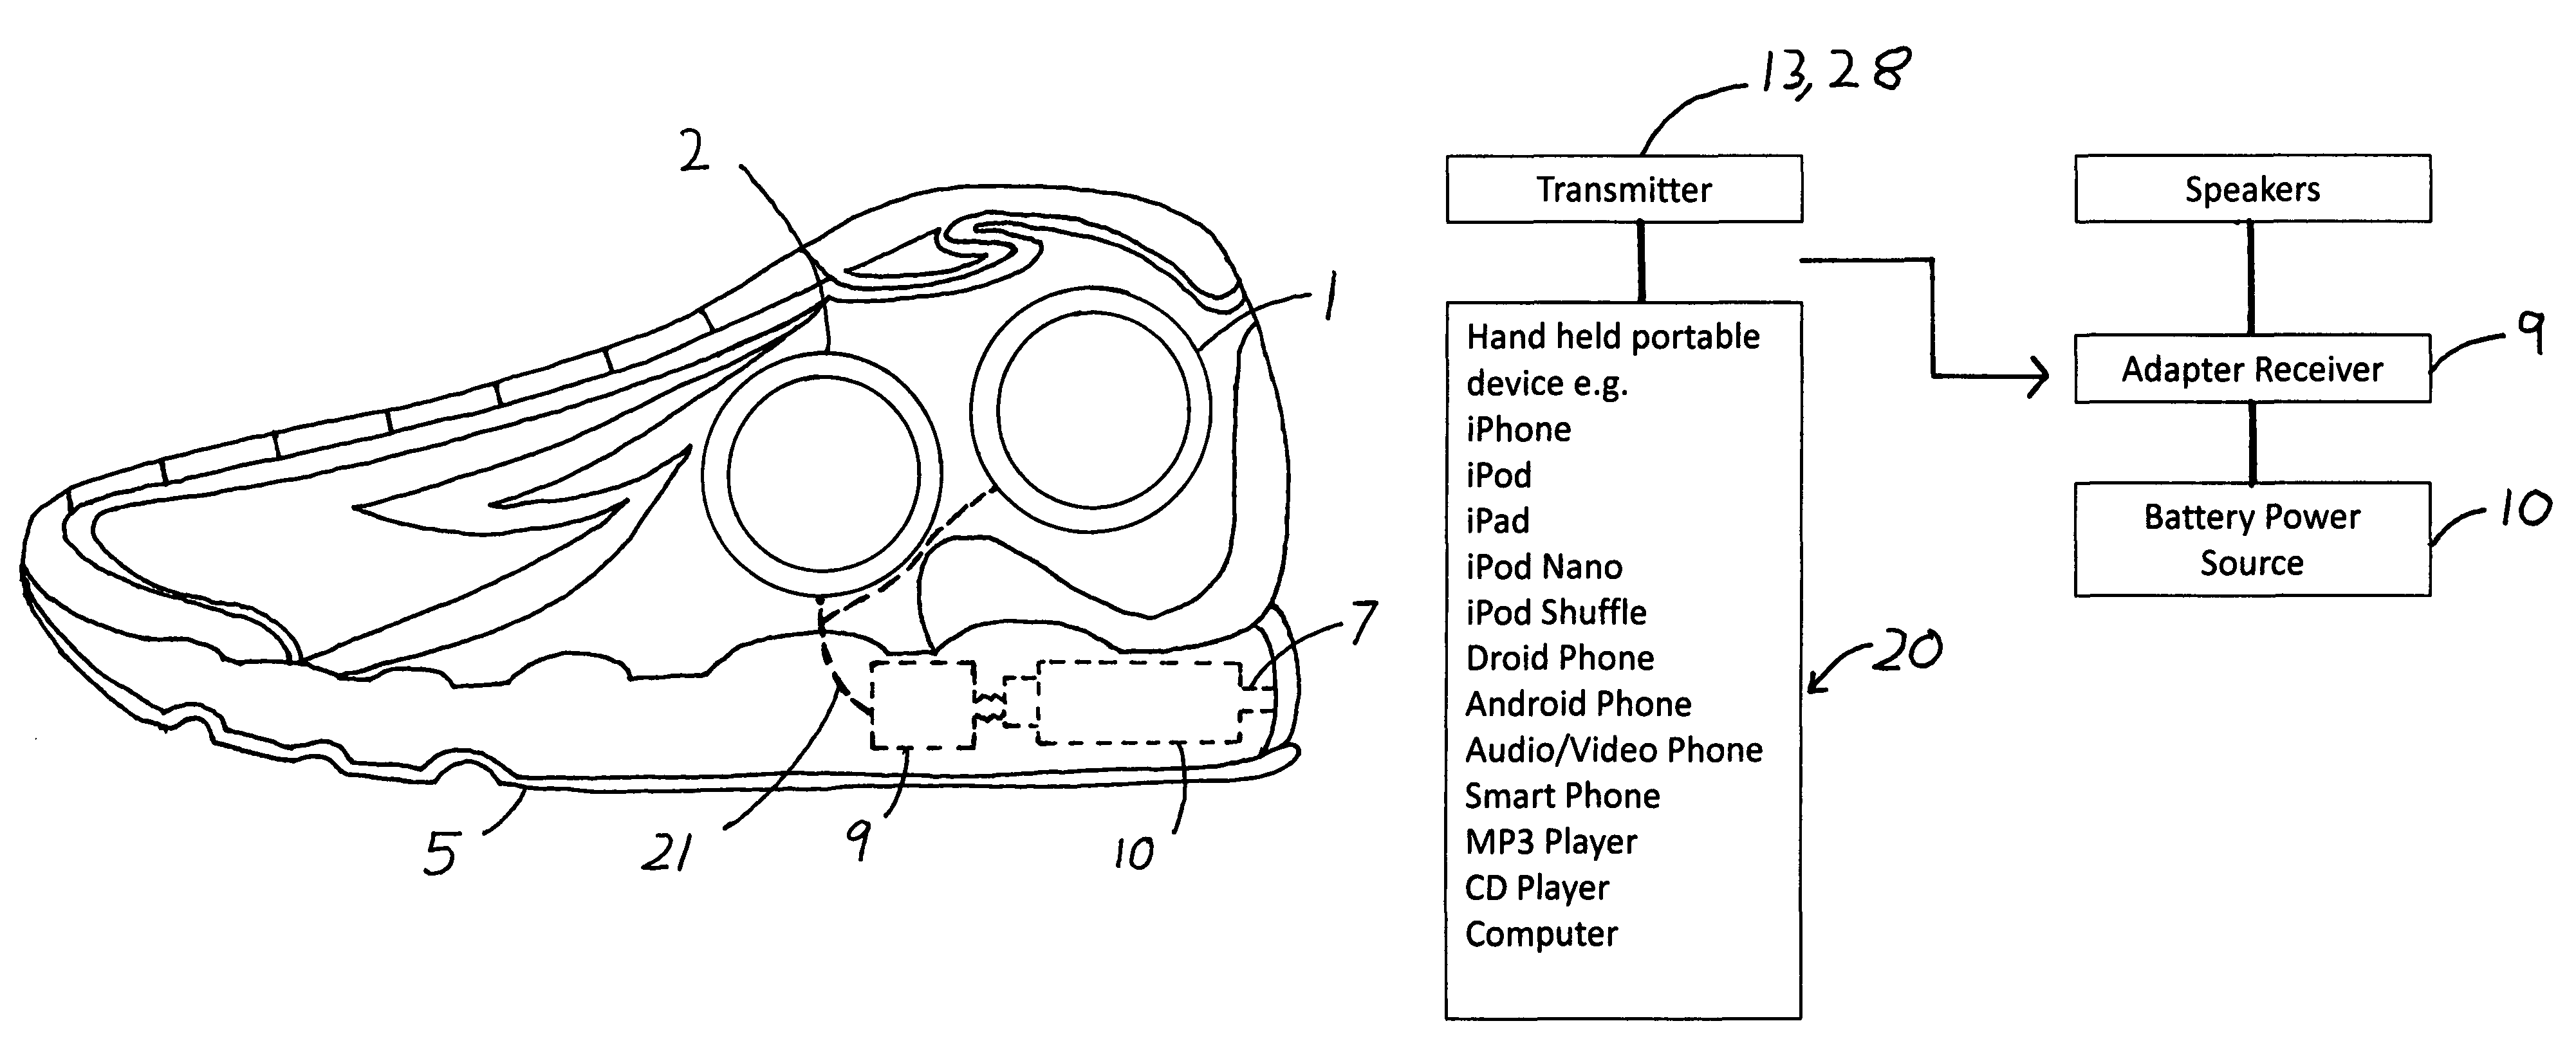 Speaker shoes with audio adapter receiver